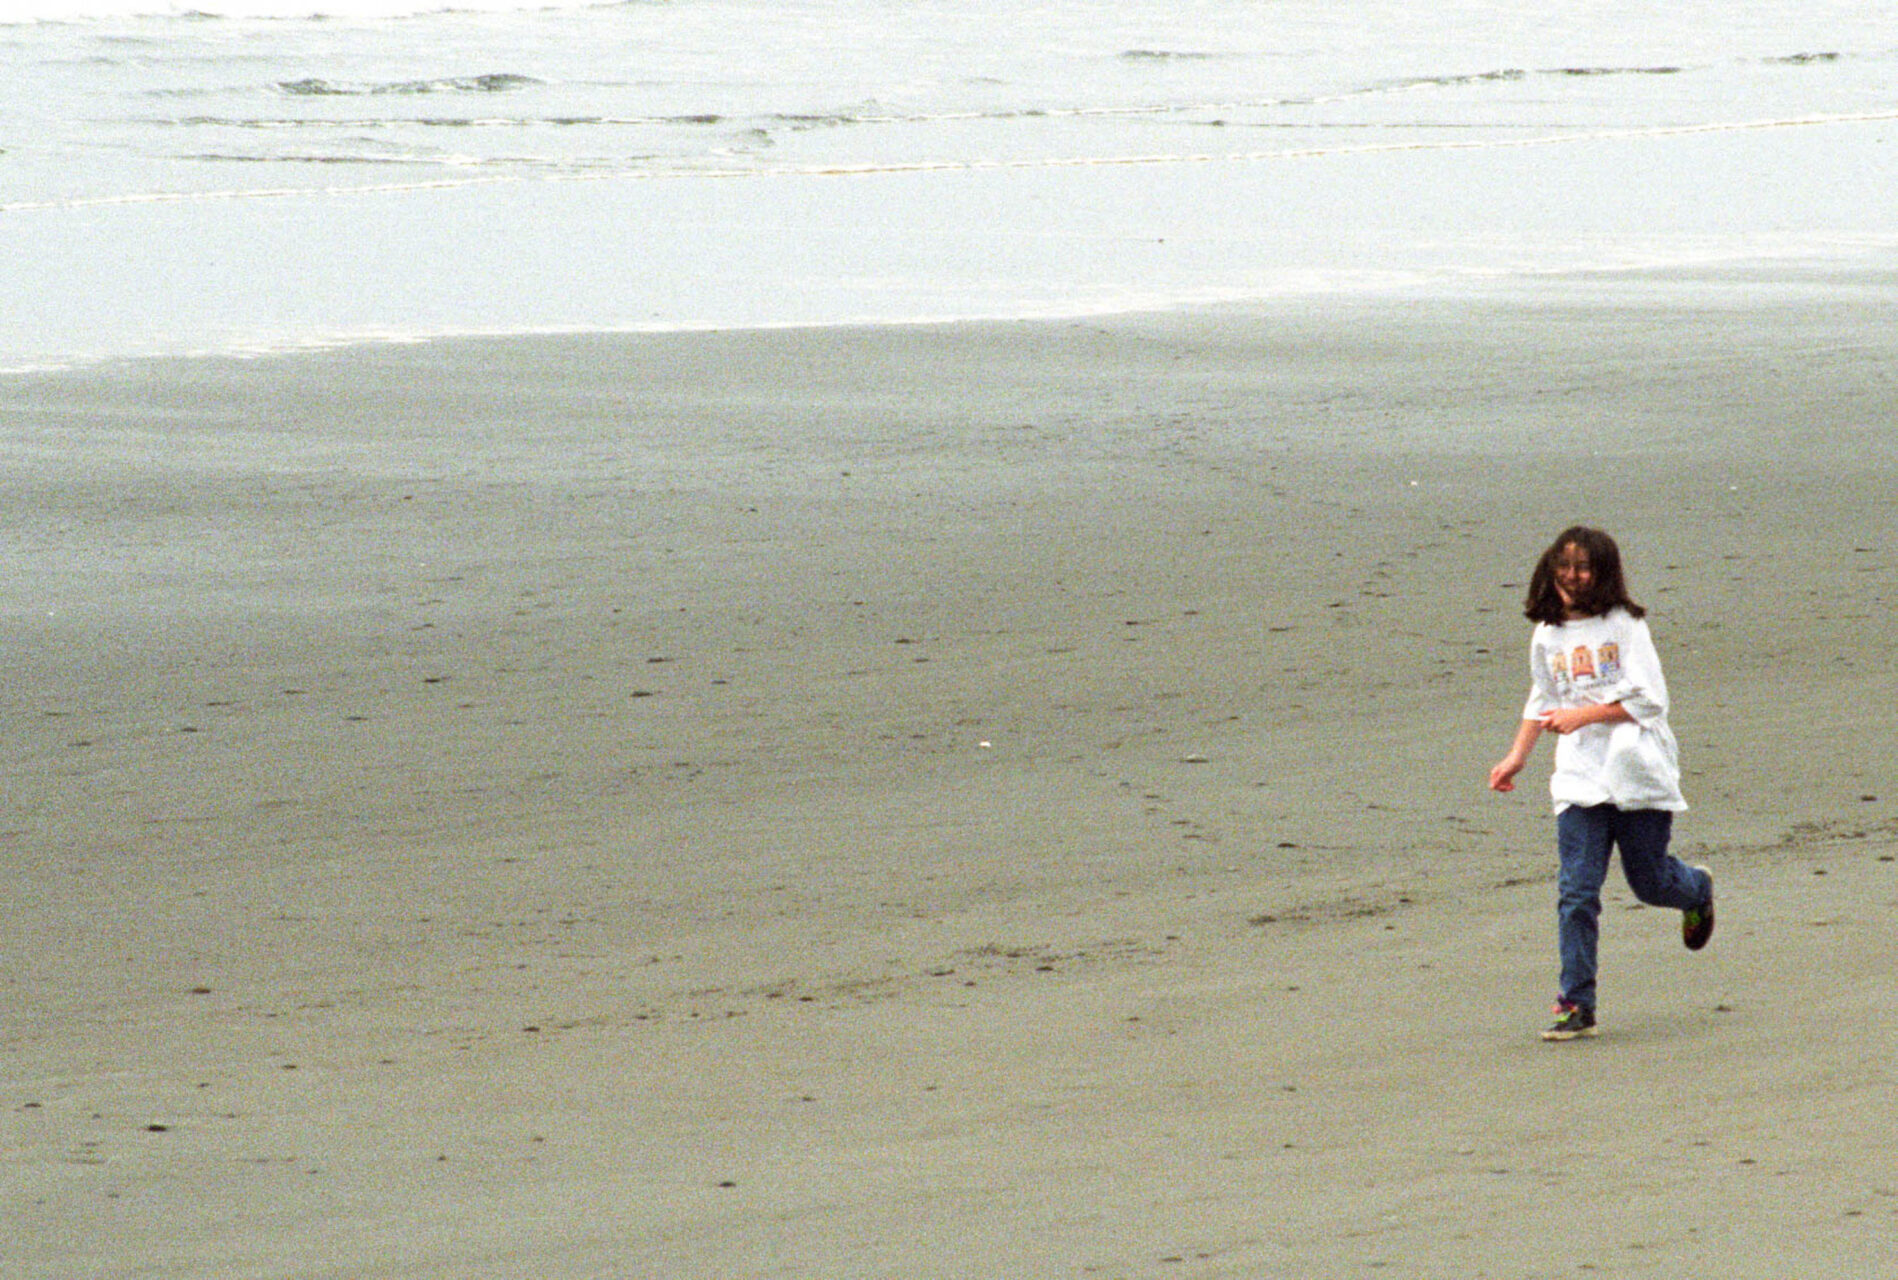 Playing on the beach in Olympic National Park.